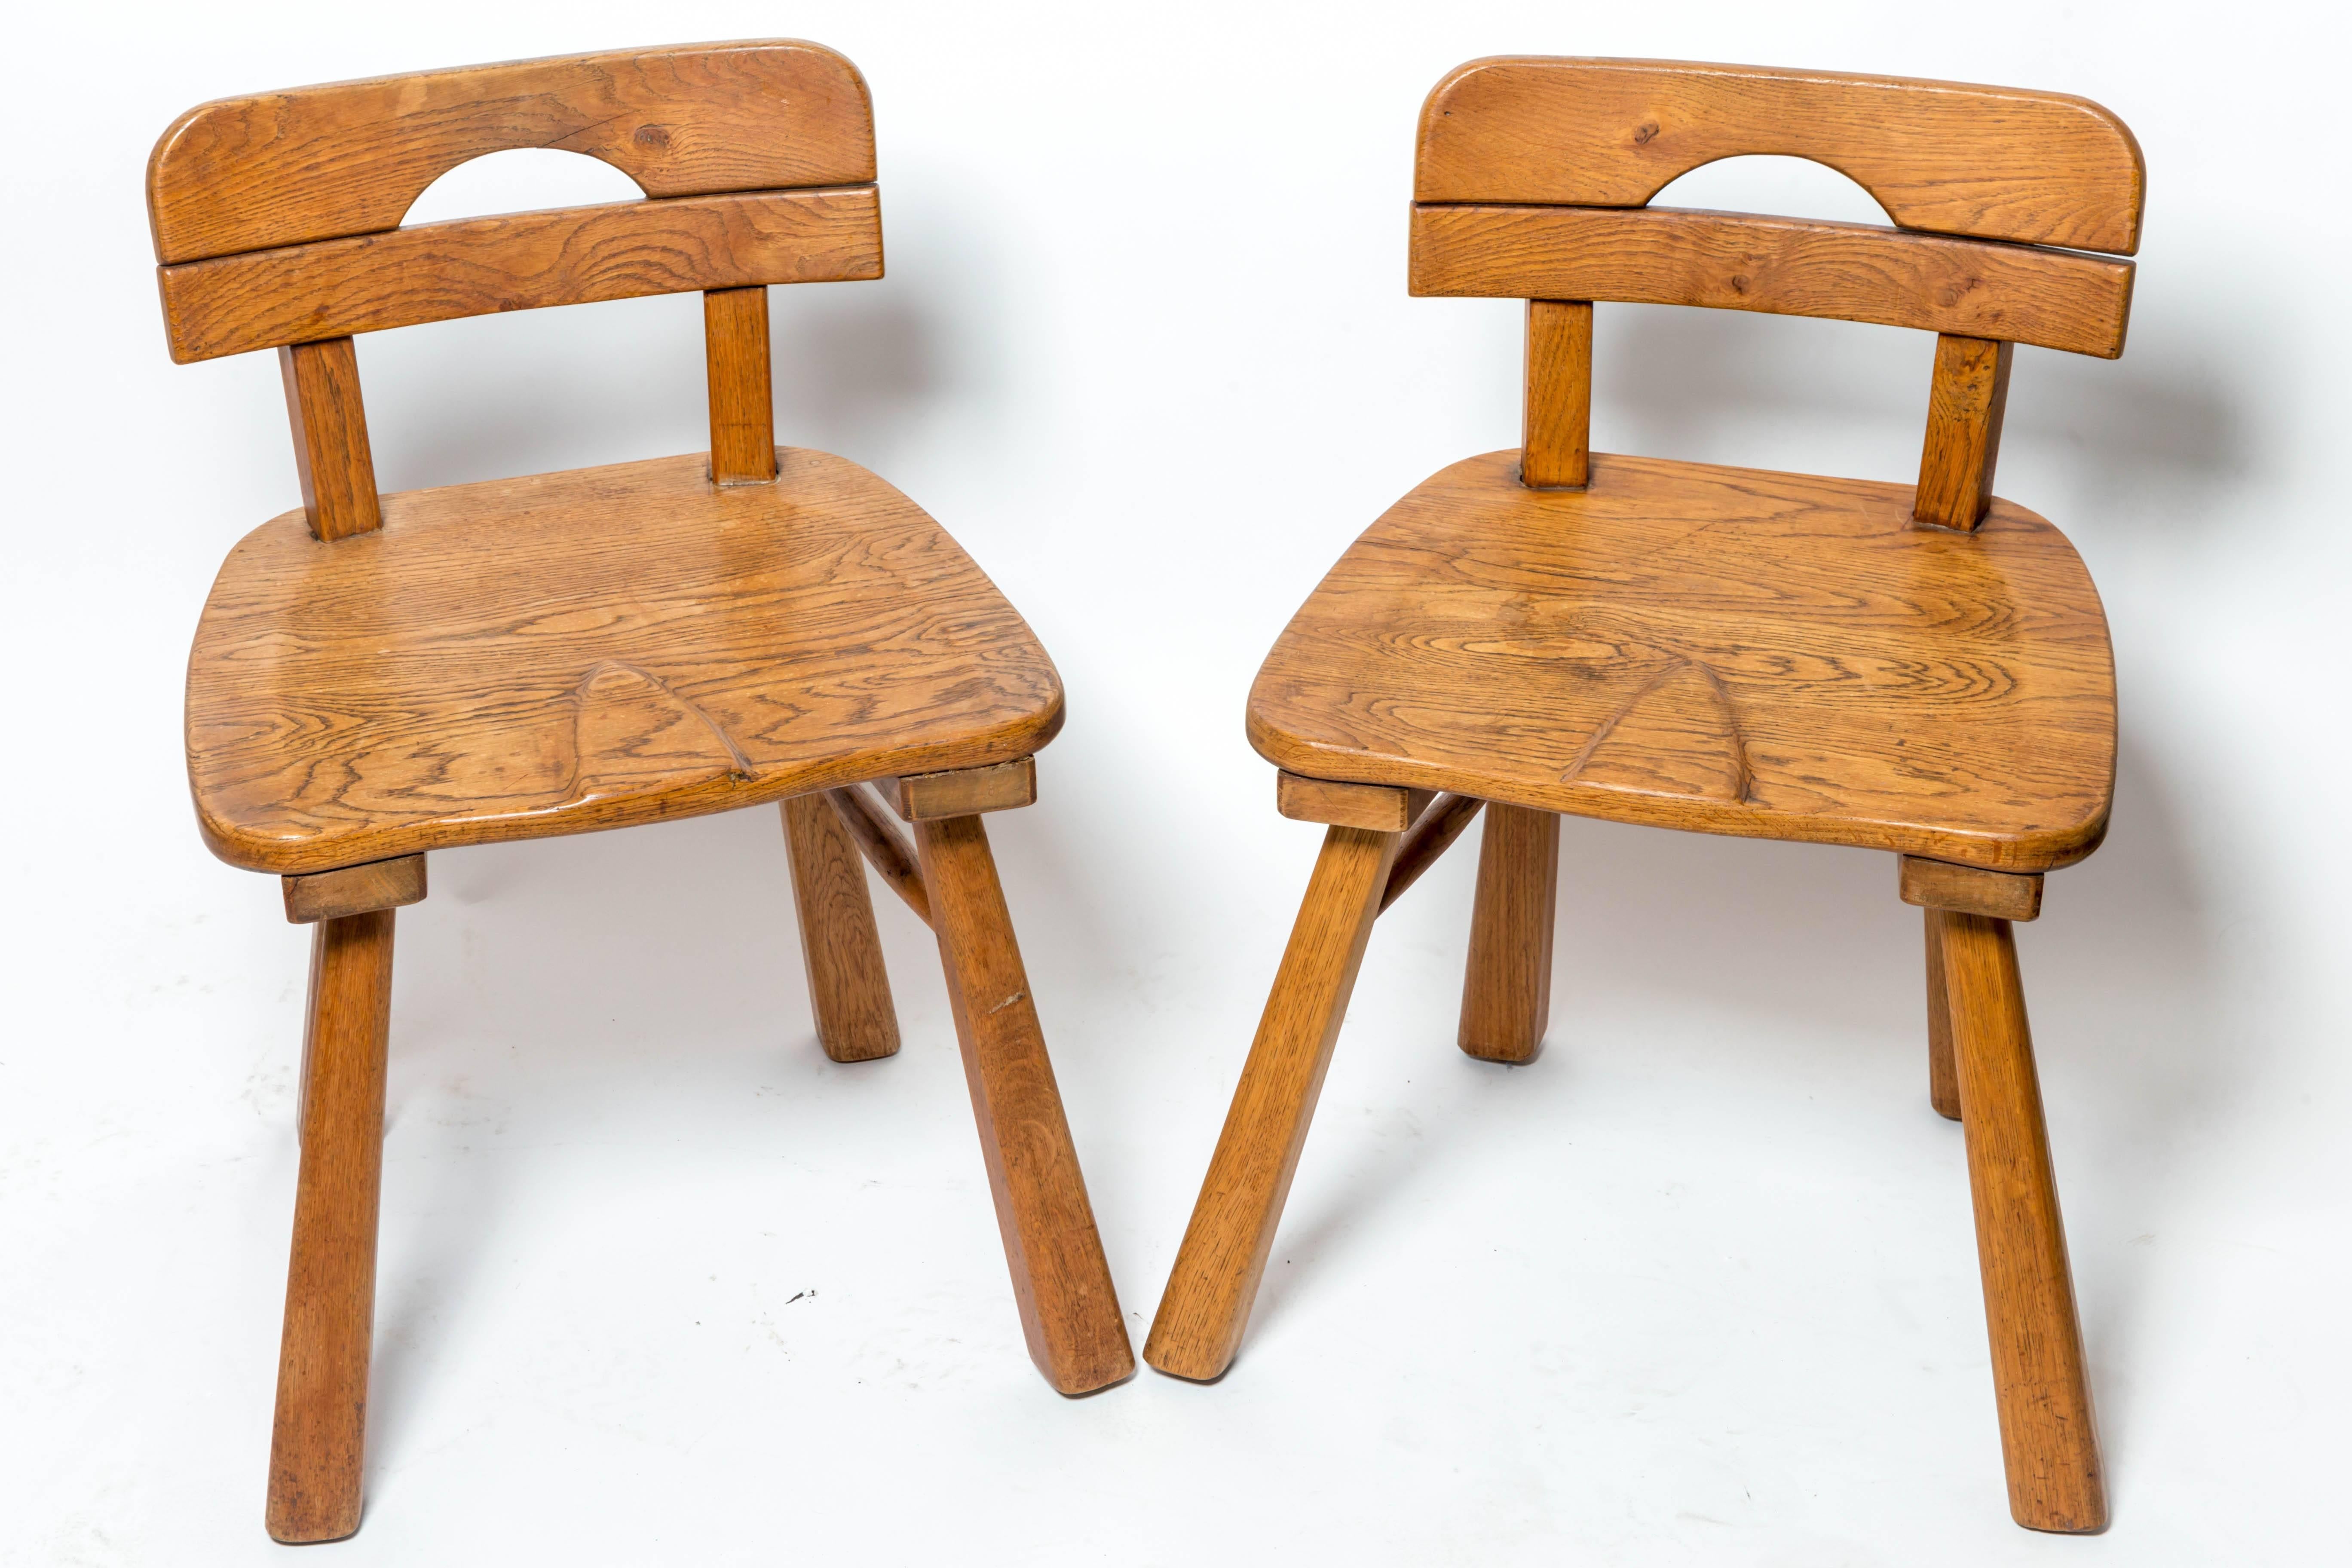 Brutalist oak stool or side chair with back by Cercle Jean Touret for Marolles, France, 1950s.